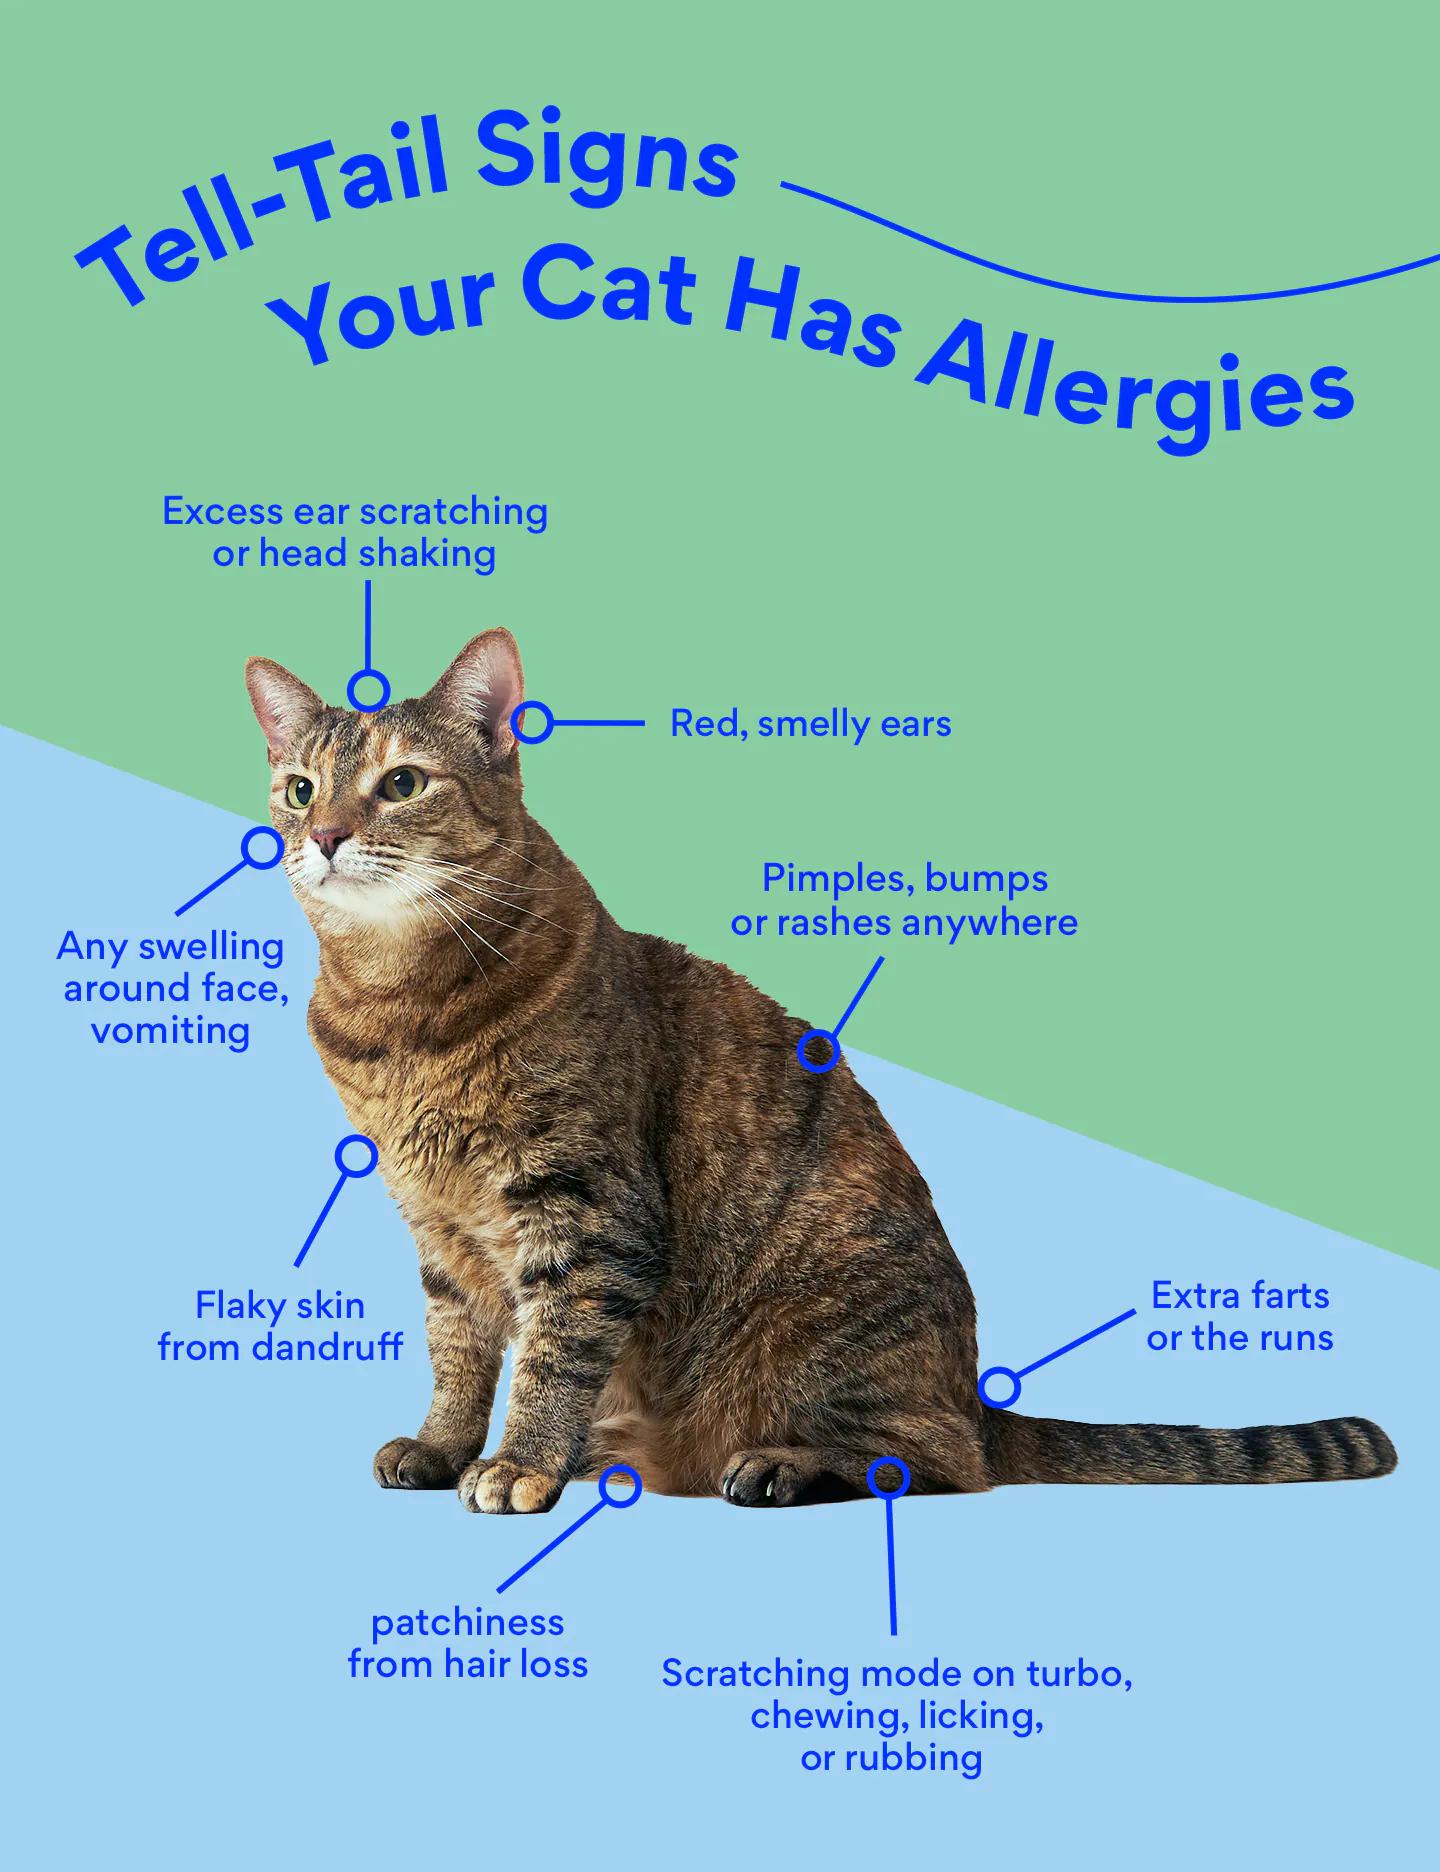 Tell-Tail signs your cat has allergies